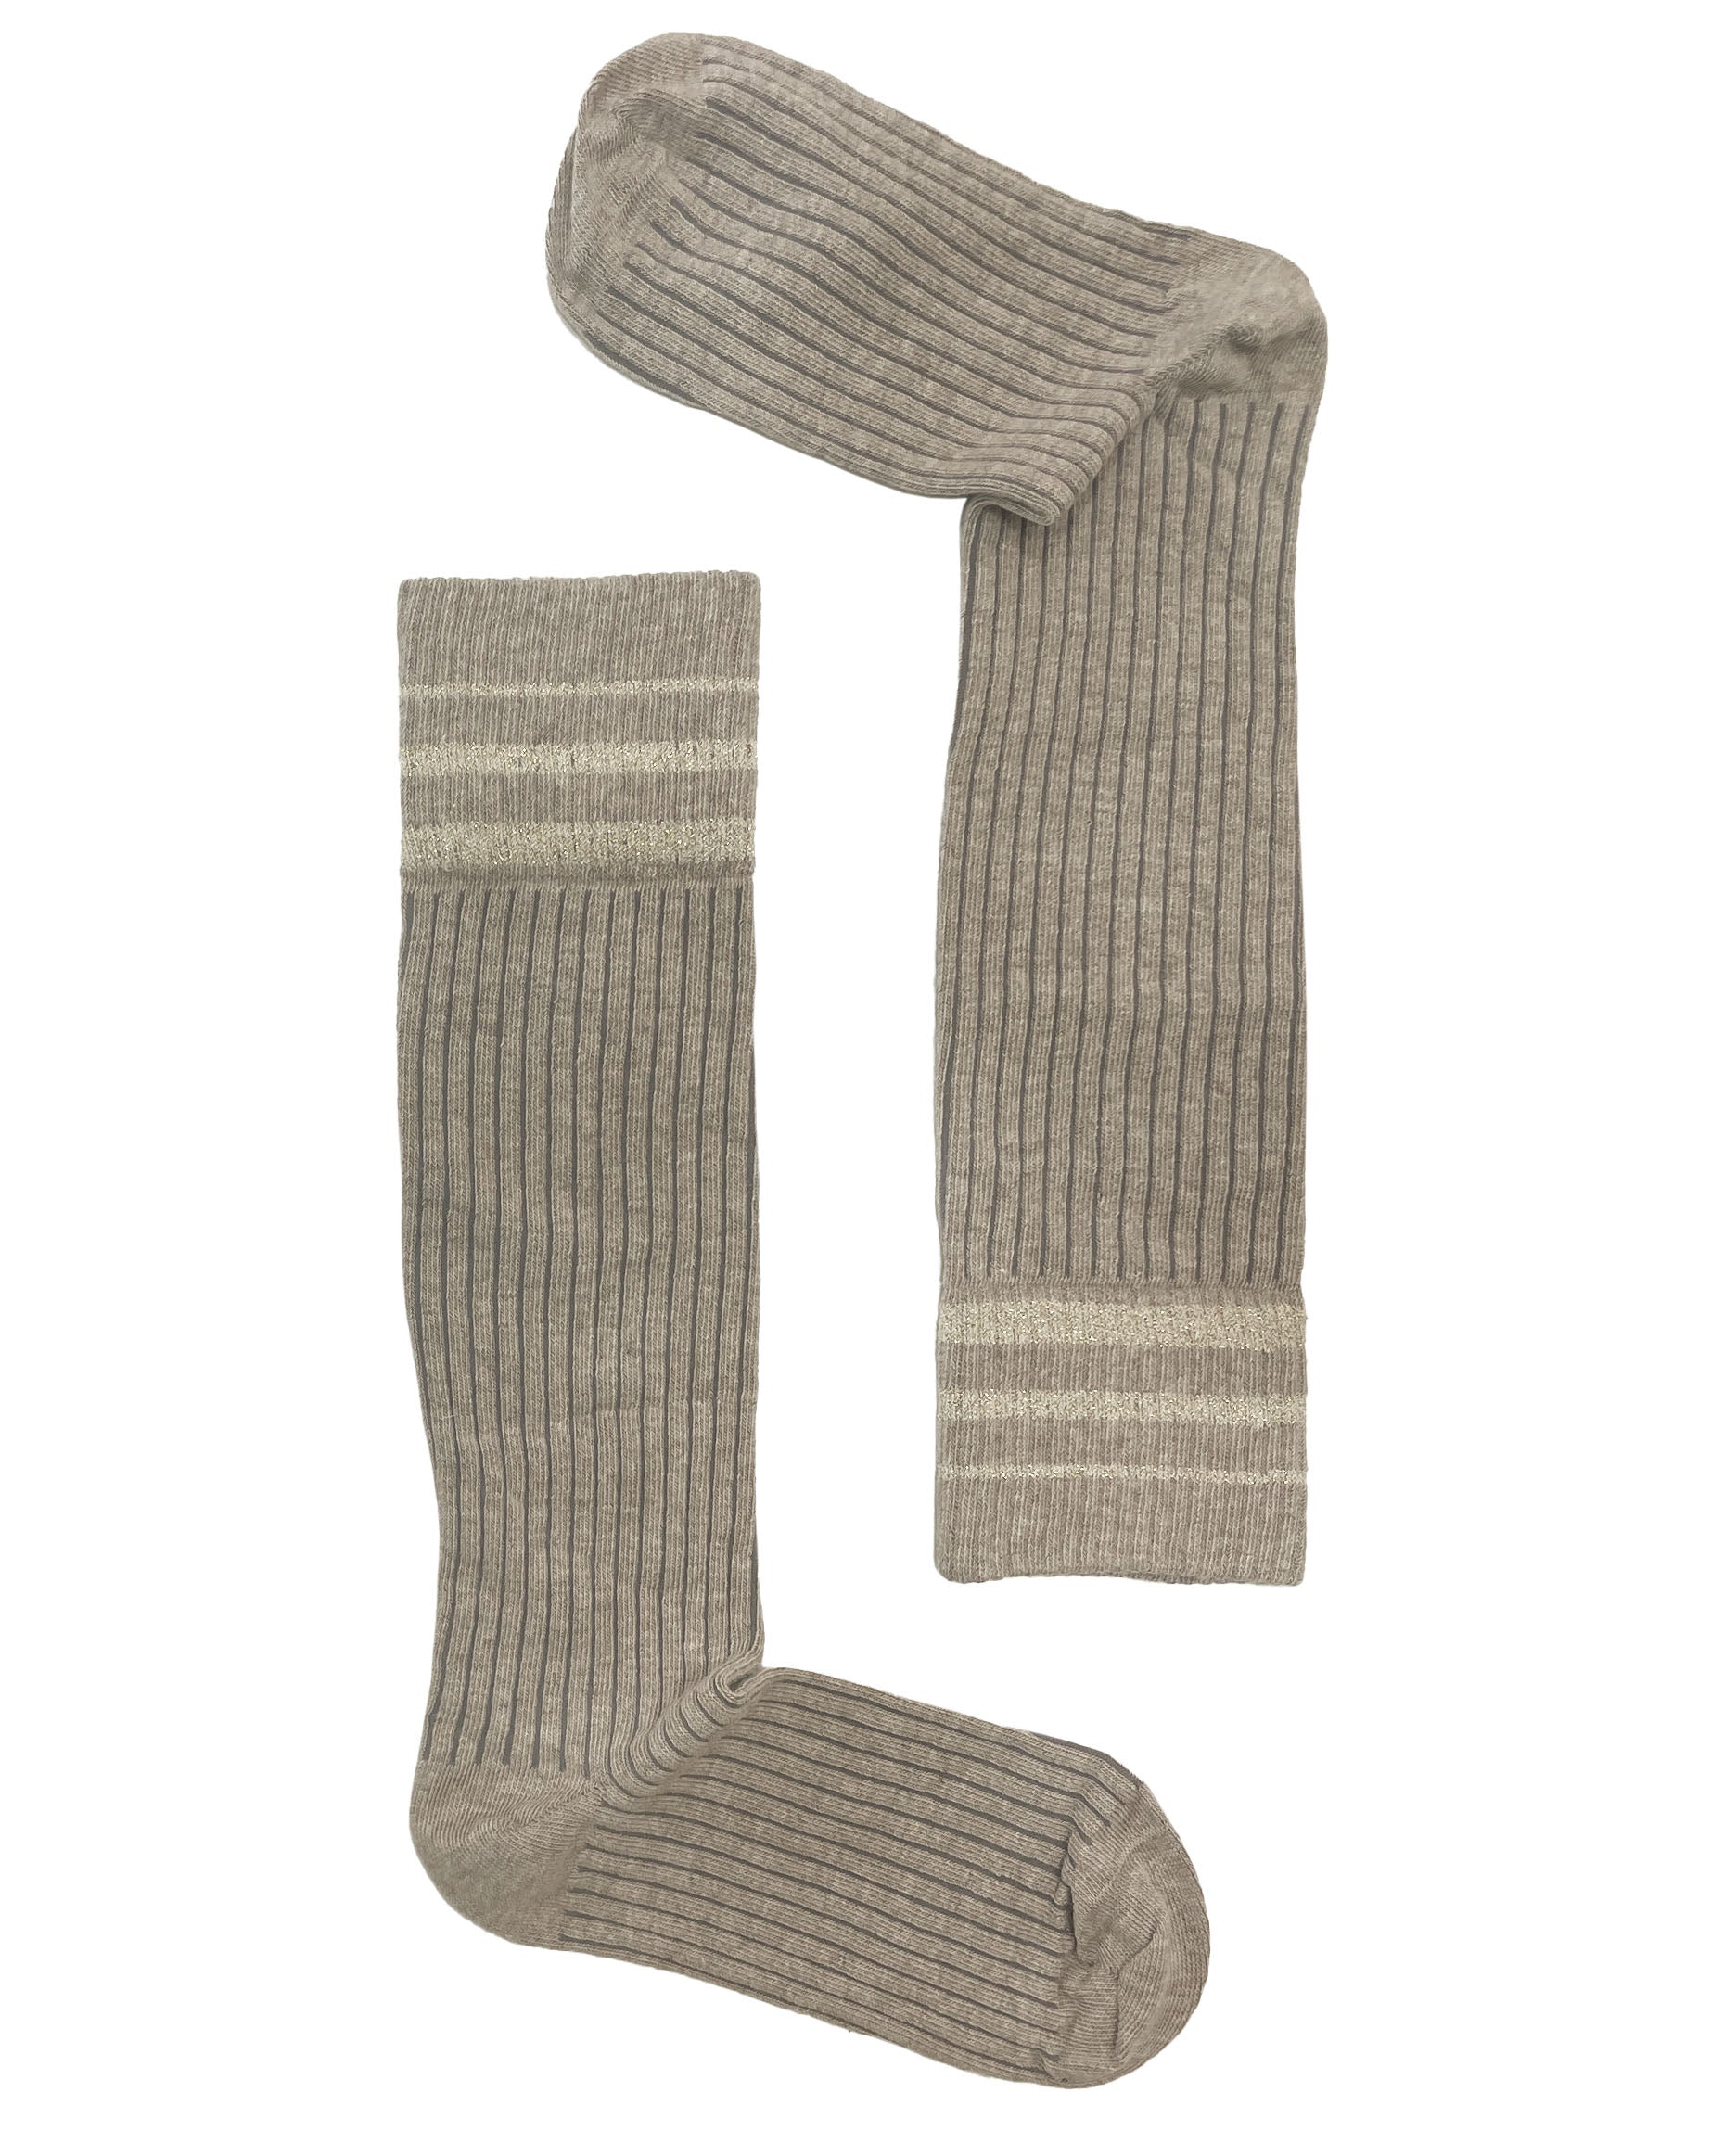 SiSi Pinstripe Gambaletto - Soft and warm oat / beige cotton ribbed knee-high socks with deep comfort cuff with contrasting gold lamé stripes